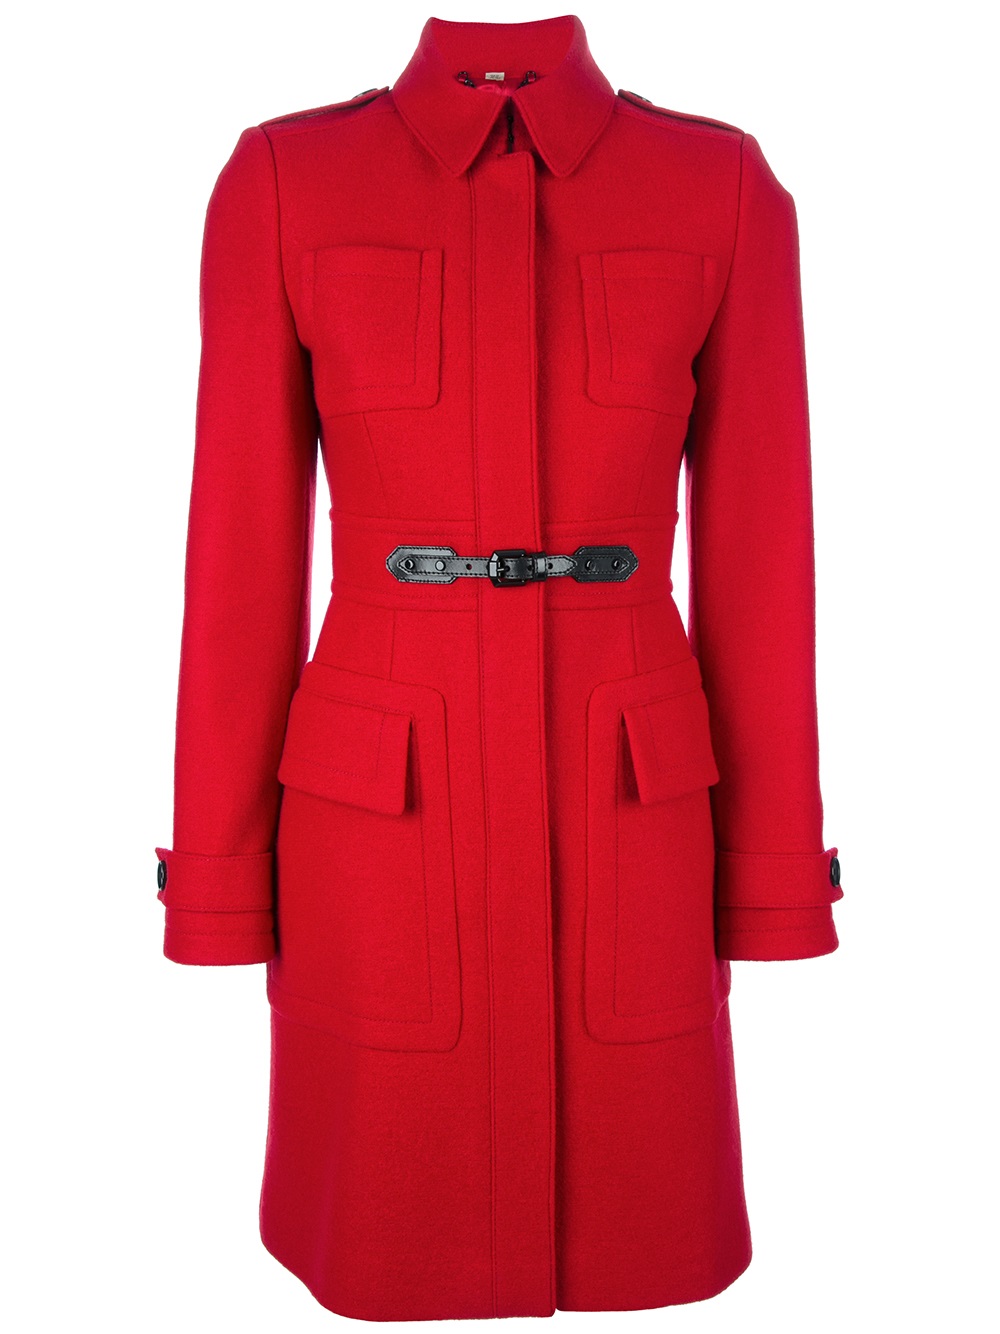 Lyst - Burberry Fitted Coat in Red